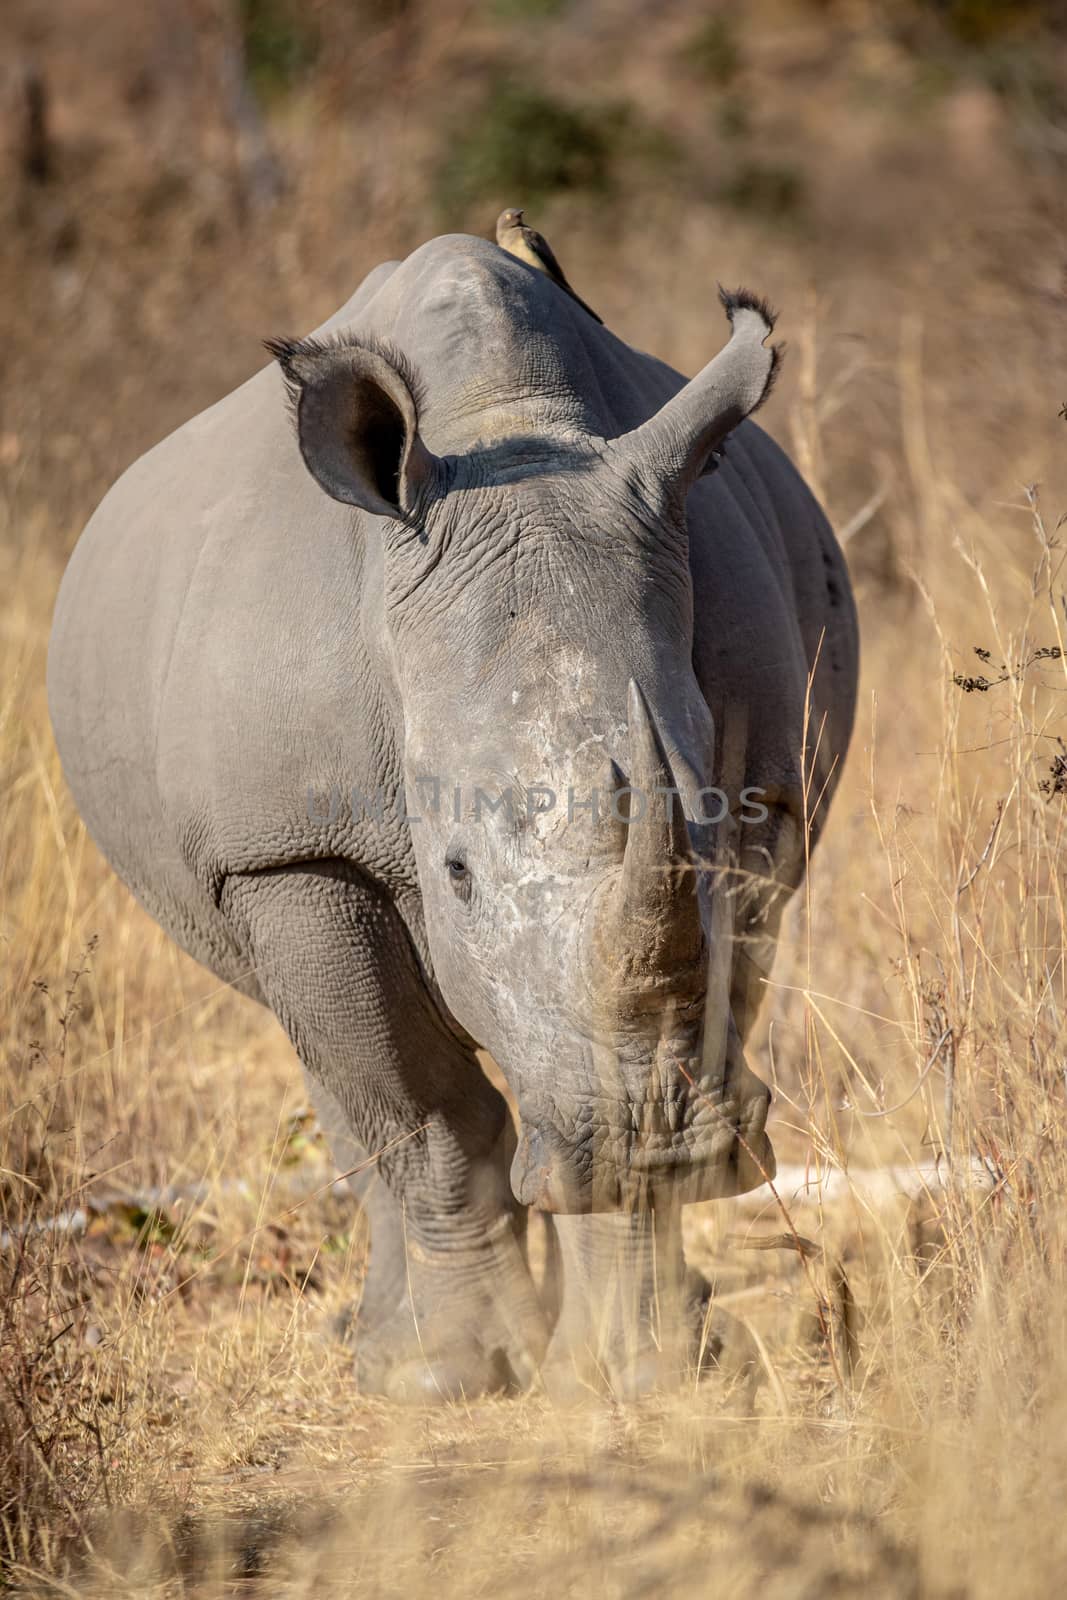 White rhino starring at the camera in the Welgevonden game reserve, South Africa.